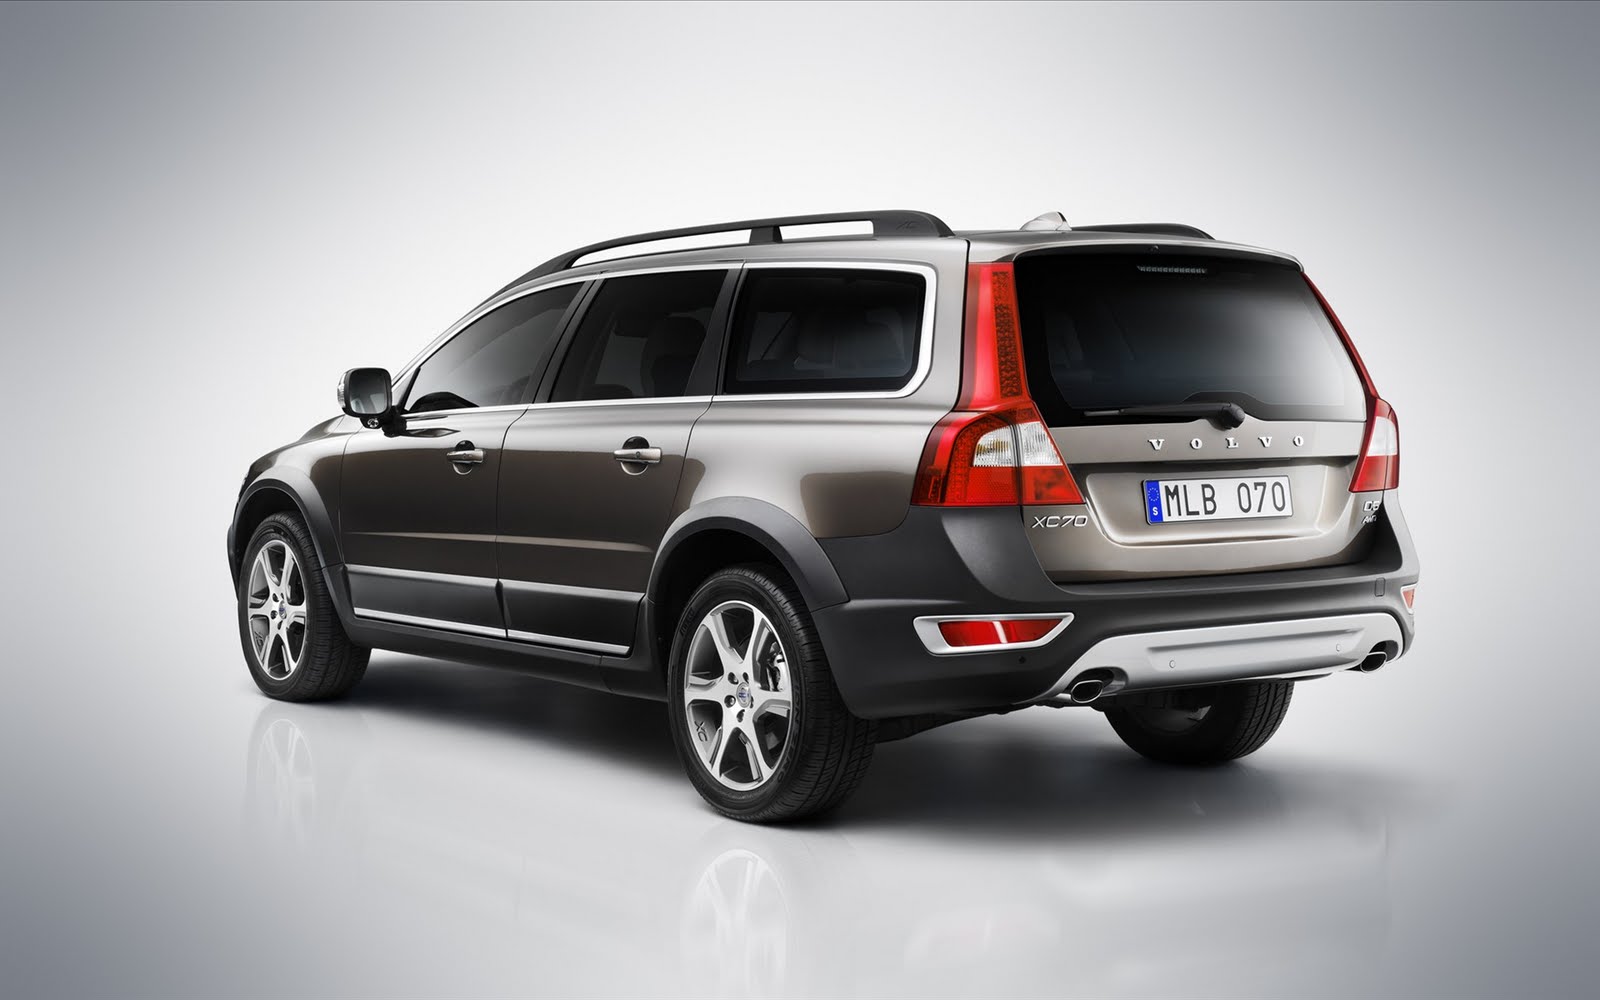 Volvo XC70 2012 Review and Spec ~ Automotive Todays